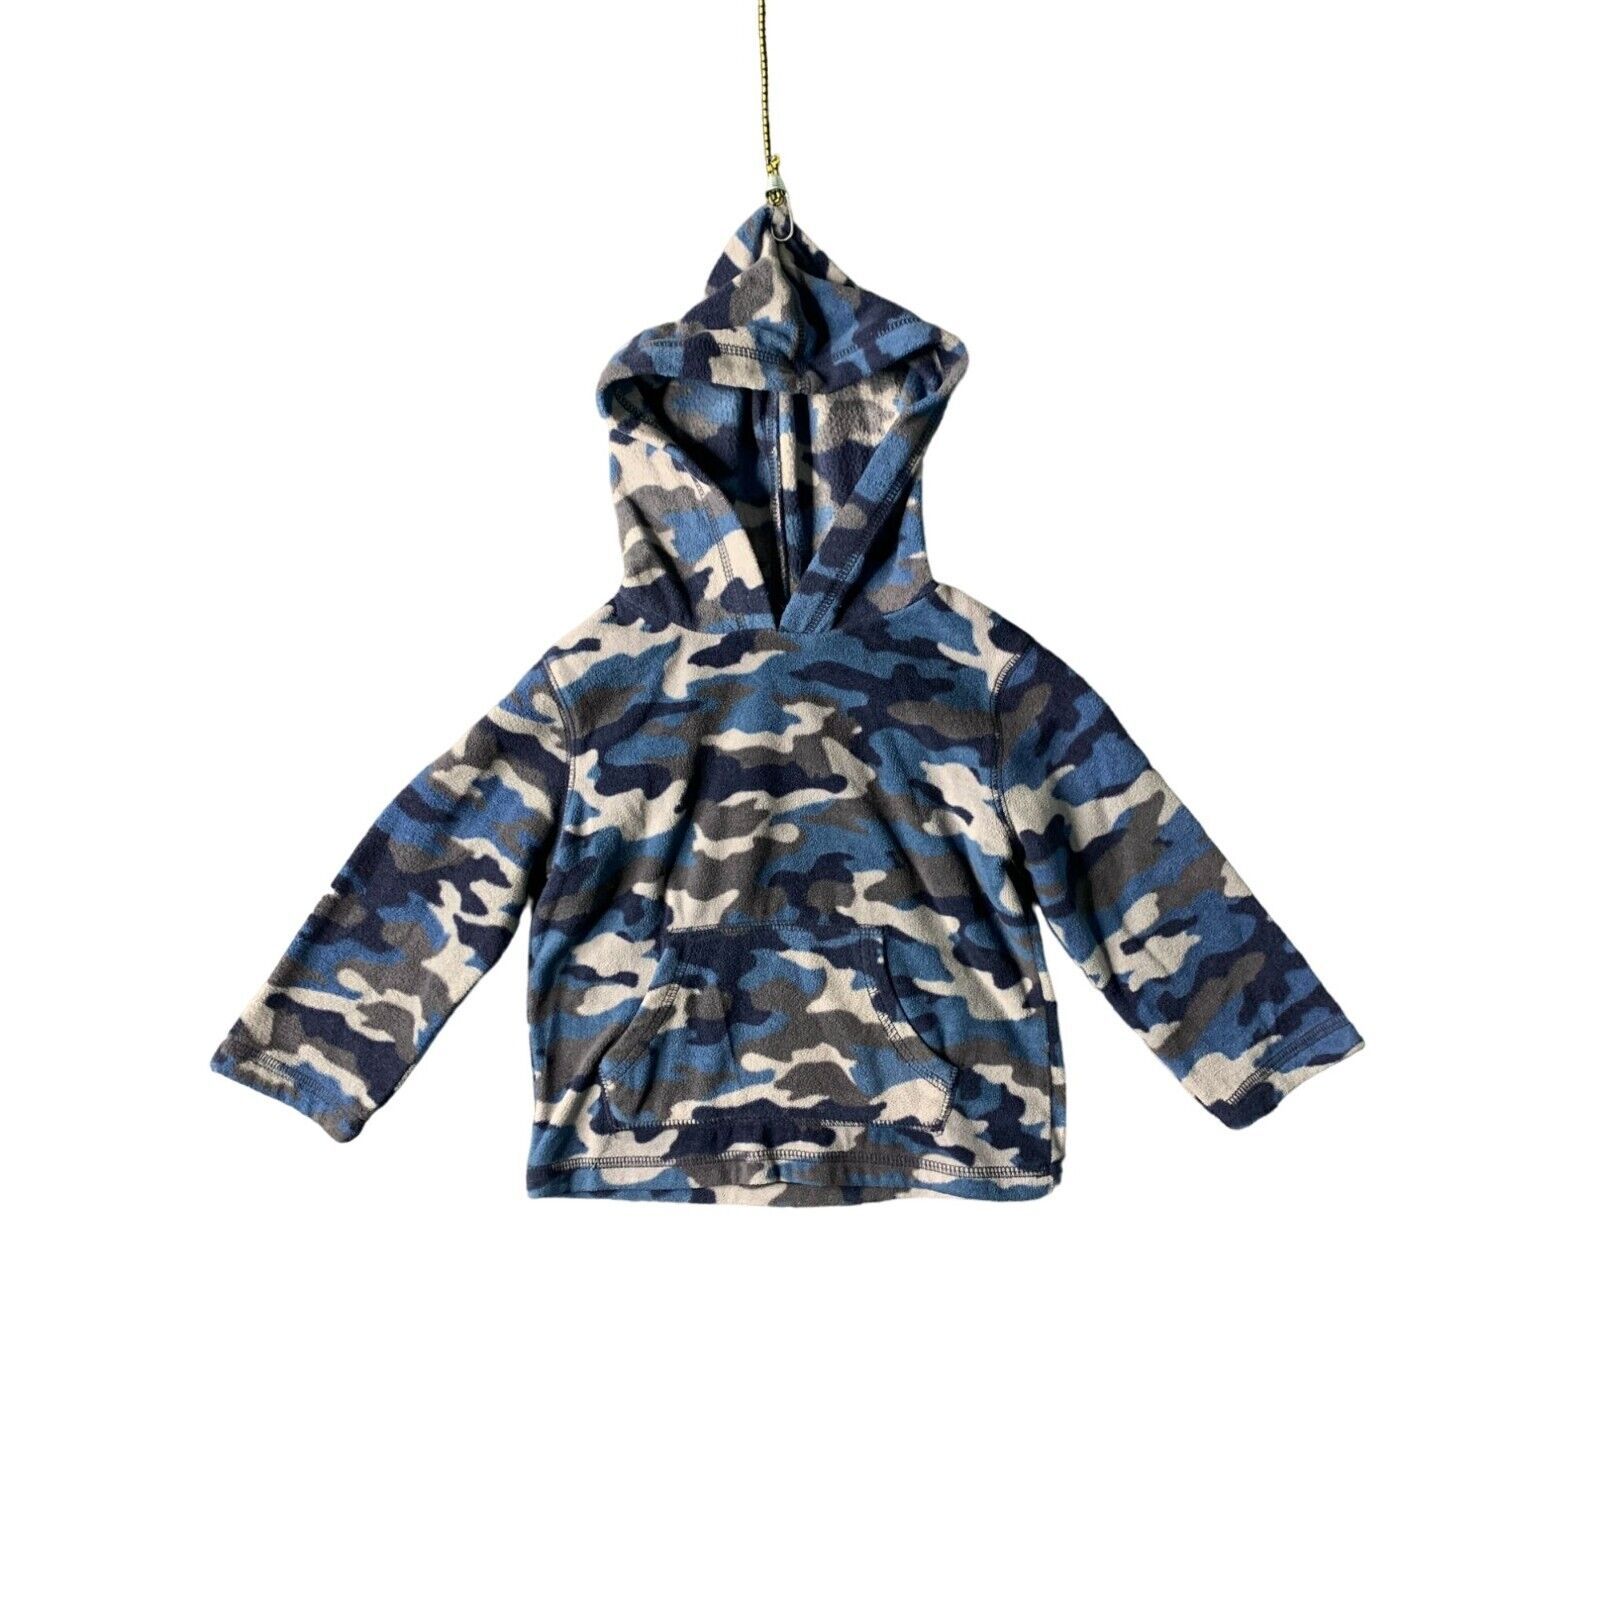 Primary image for Jumping Bean Boys Infant Baby Size 24 Months Blue Camo Long Sleeve Fleece Hoodie